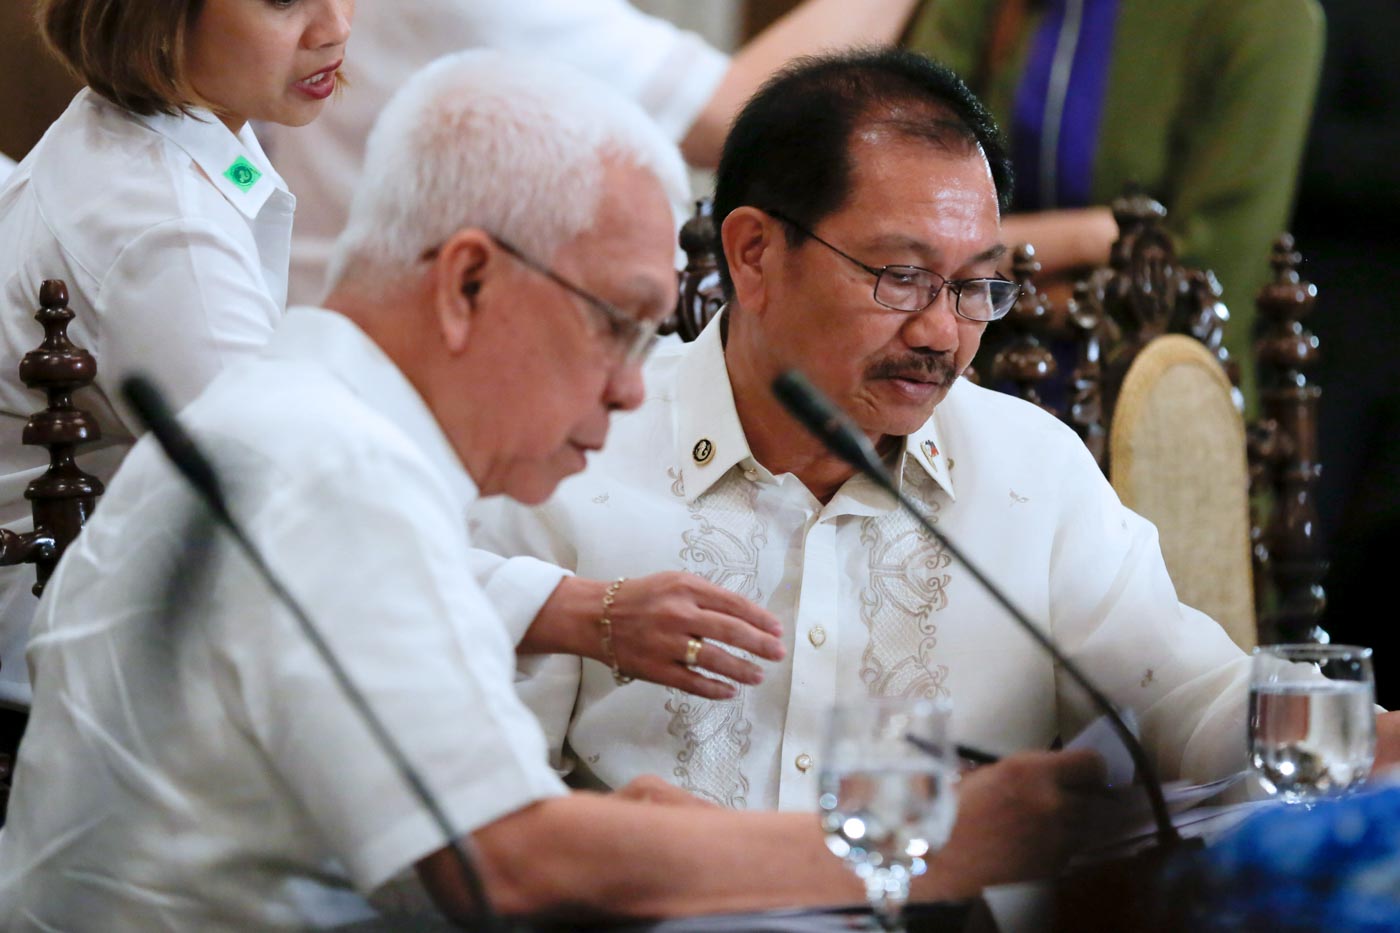 DUTERTE'S TRUSTED MAN. Cabinet Secretary Leoncio Evasco Jr (left) reviews some papers with Agriculture Secretary Manny Piñol before the start of the 6th Cabinet meeting in Malacañang on September 14. File photo by Toto Lozano/PPD  